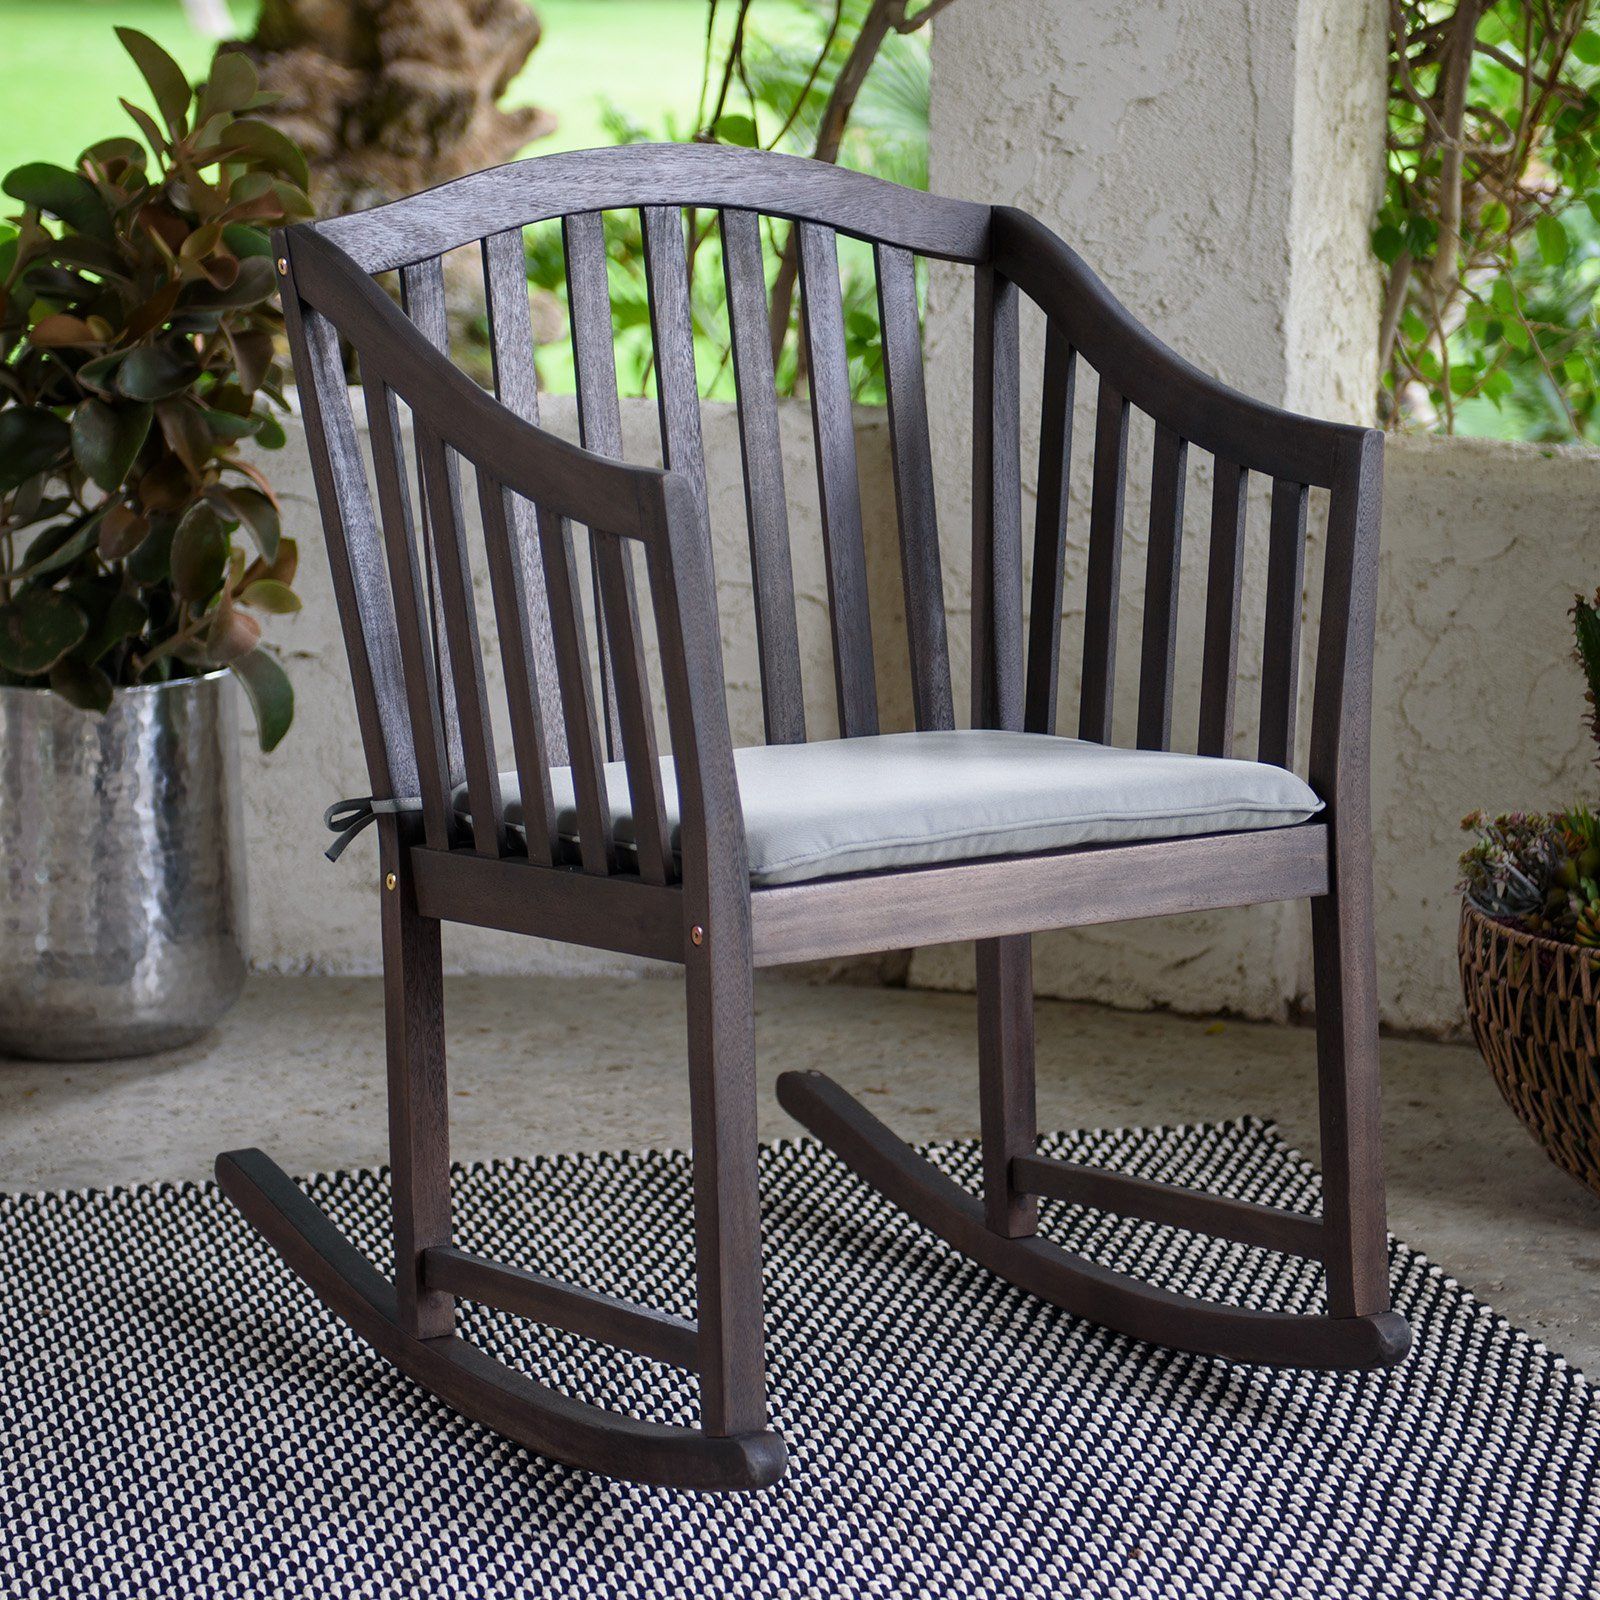 Belham Living Overton Curved Slat Back Outdoor Rocking Chair With Warm Brown Slat Back Rocking Chairs (View 8 of 20)